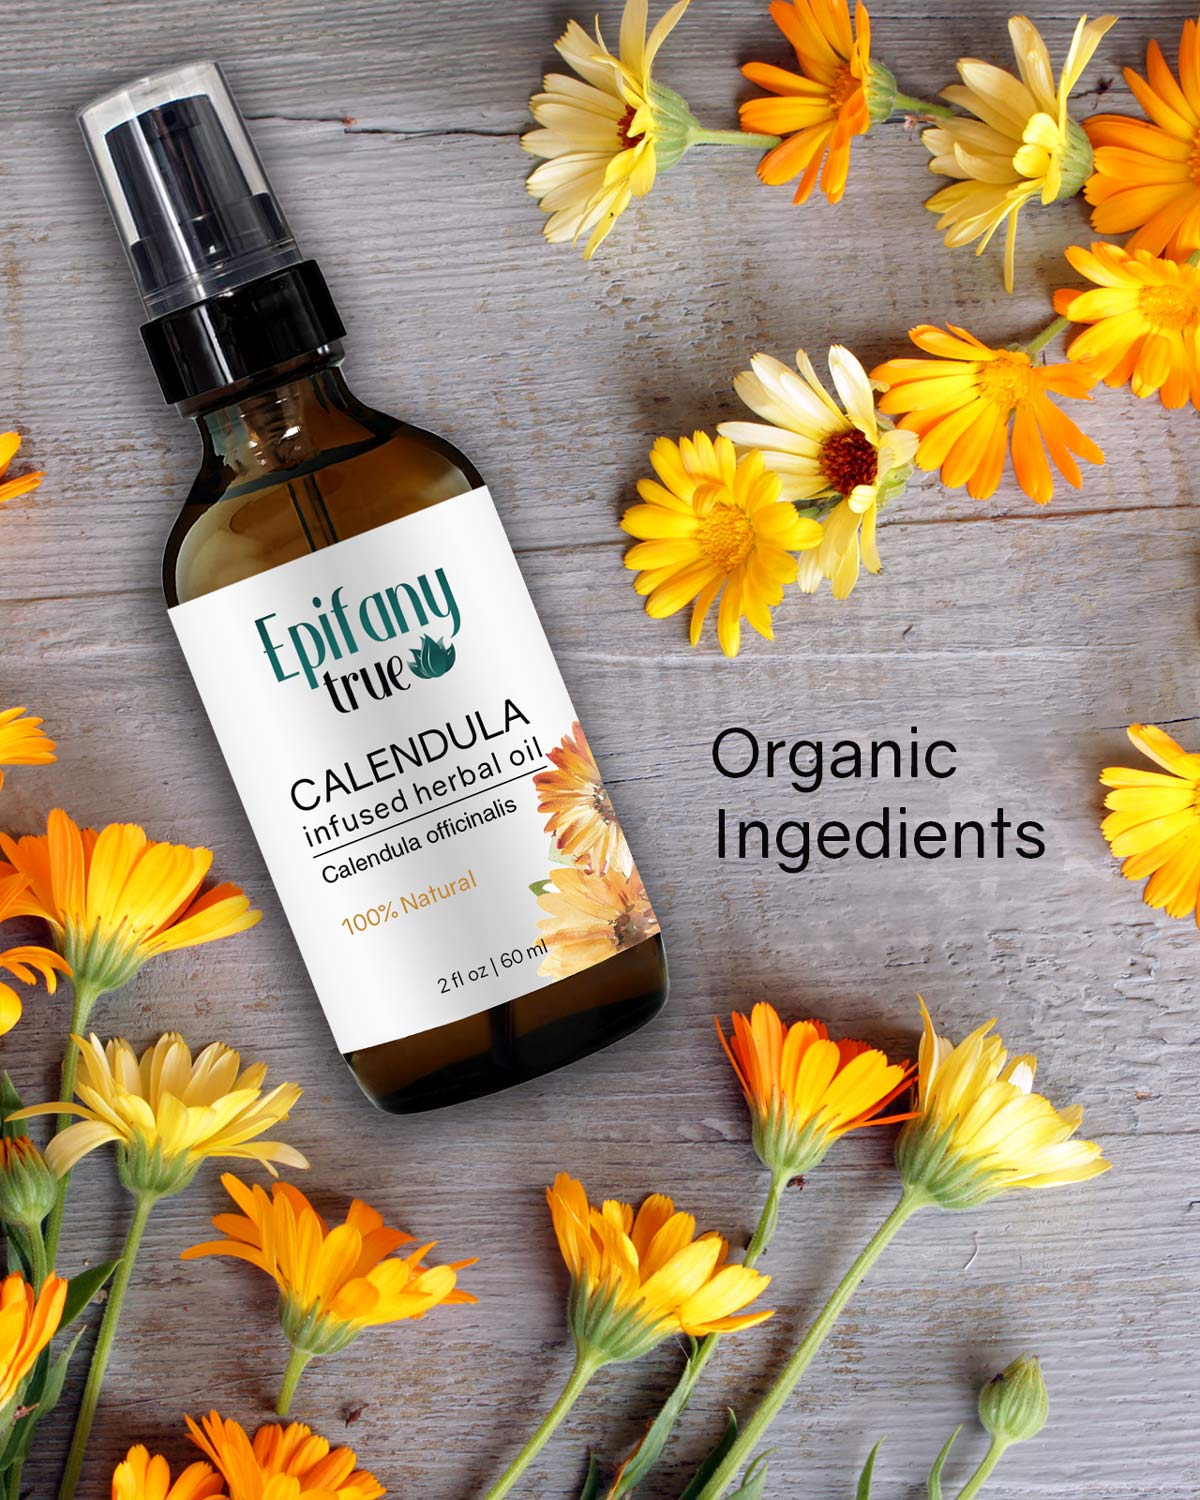 Epifany True Calendula Oil 2oz infused in organic sunflower seed oil